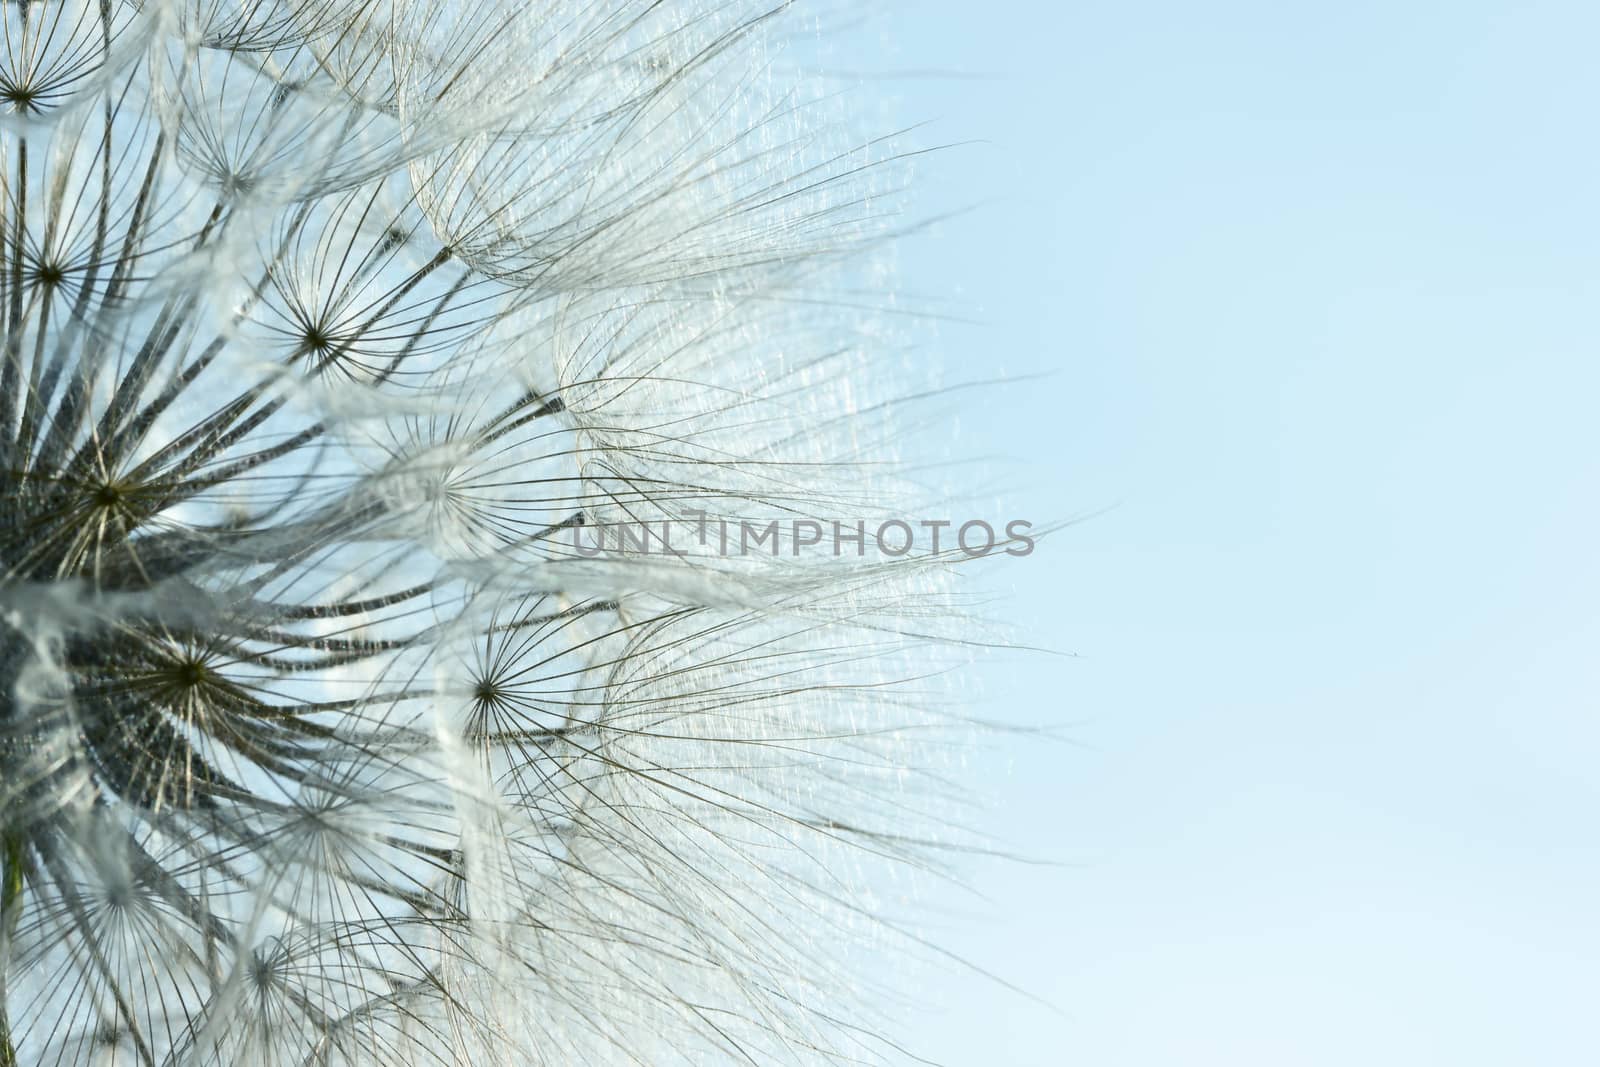 Extreme close up view of dandelion flower with seed